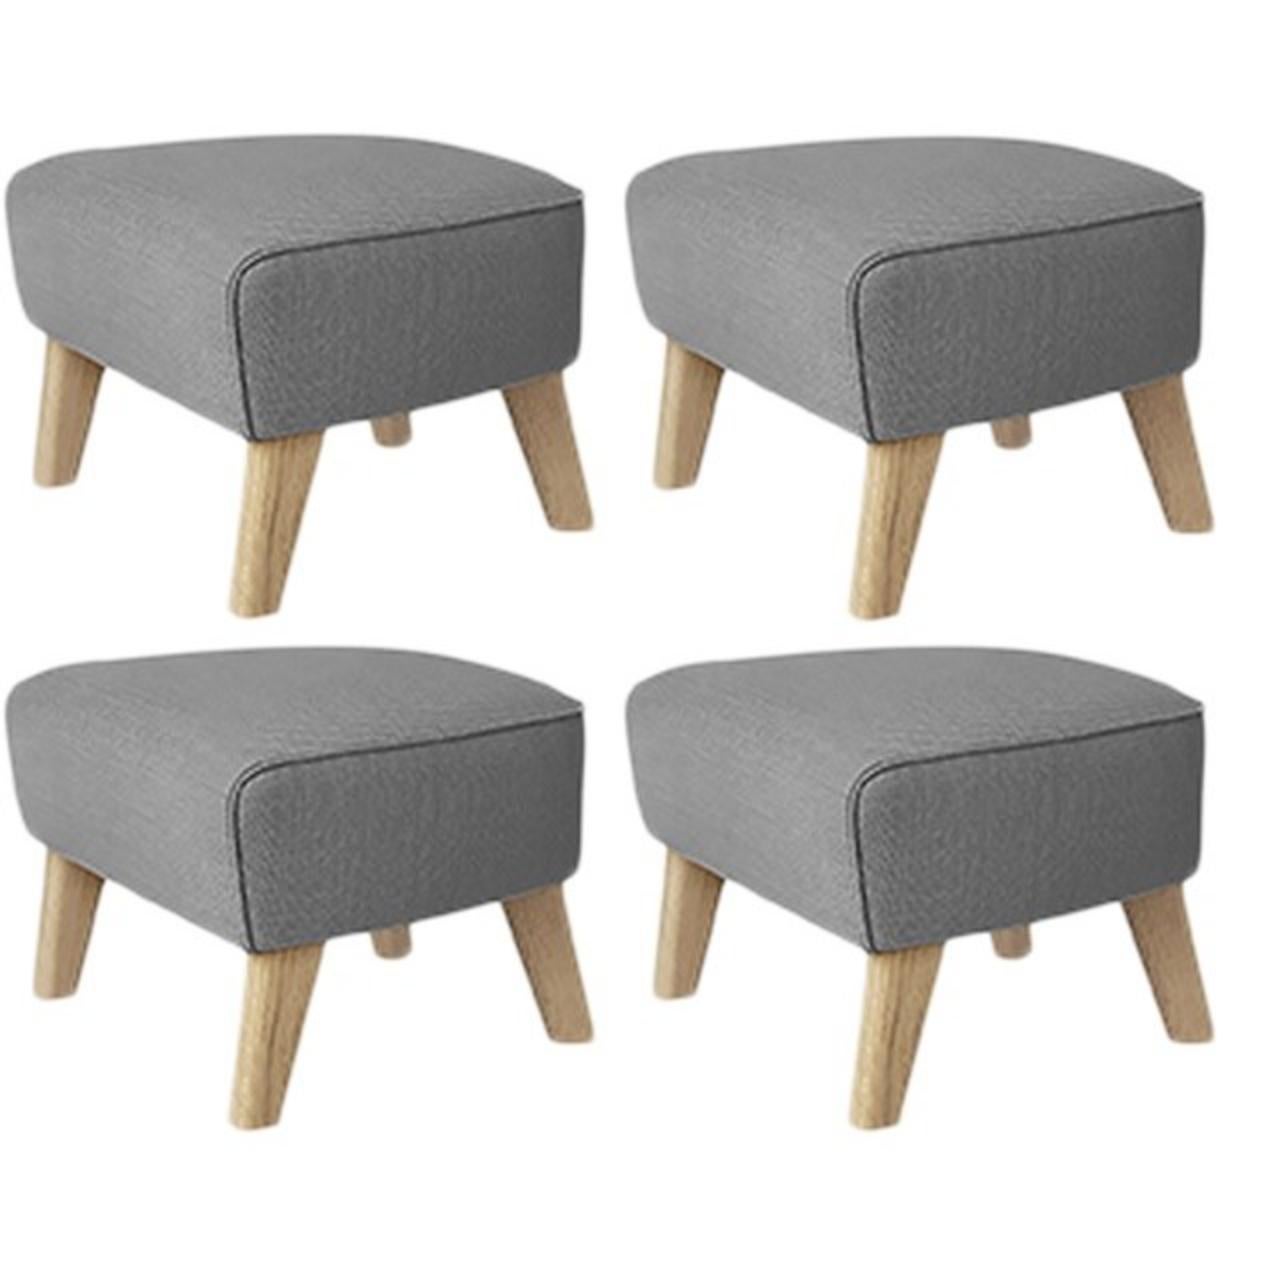 Set of 4 grey, natural oak raf simons vidar 3 my own chair footstool by Lassen.
Dimensions: W 56 x D 58 x H 40 cm 
Materials: Textile
Also available: Other colors available.

The My Own Chair Footstool has been designed in the same spirit as